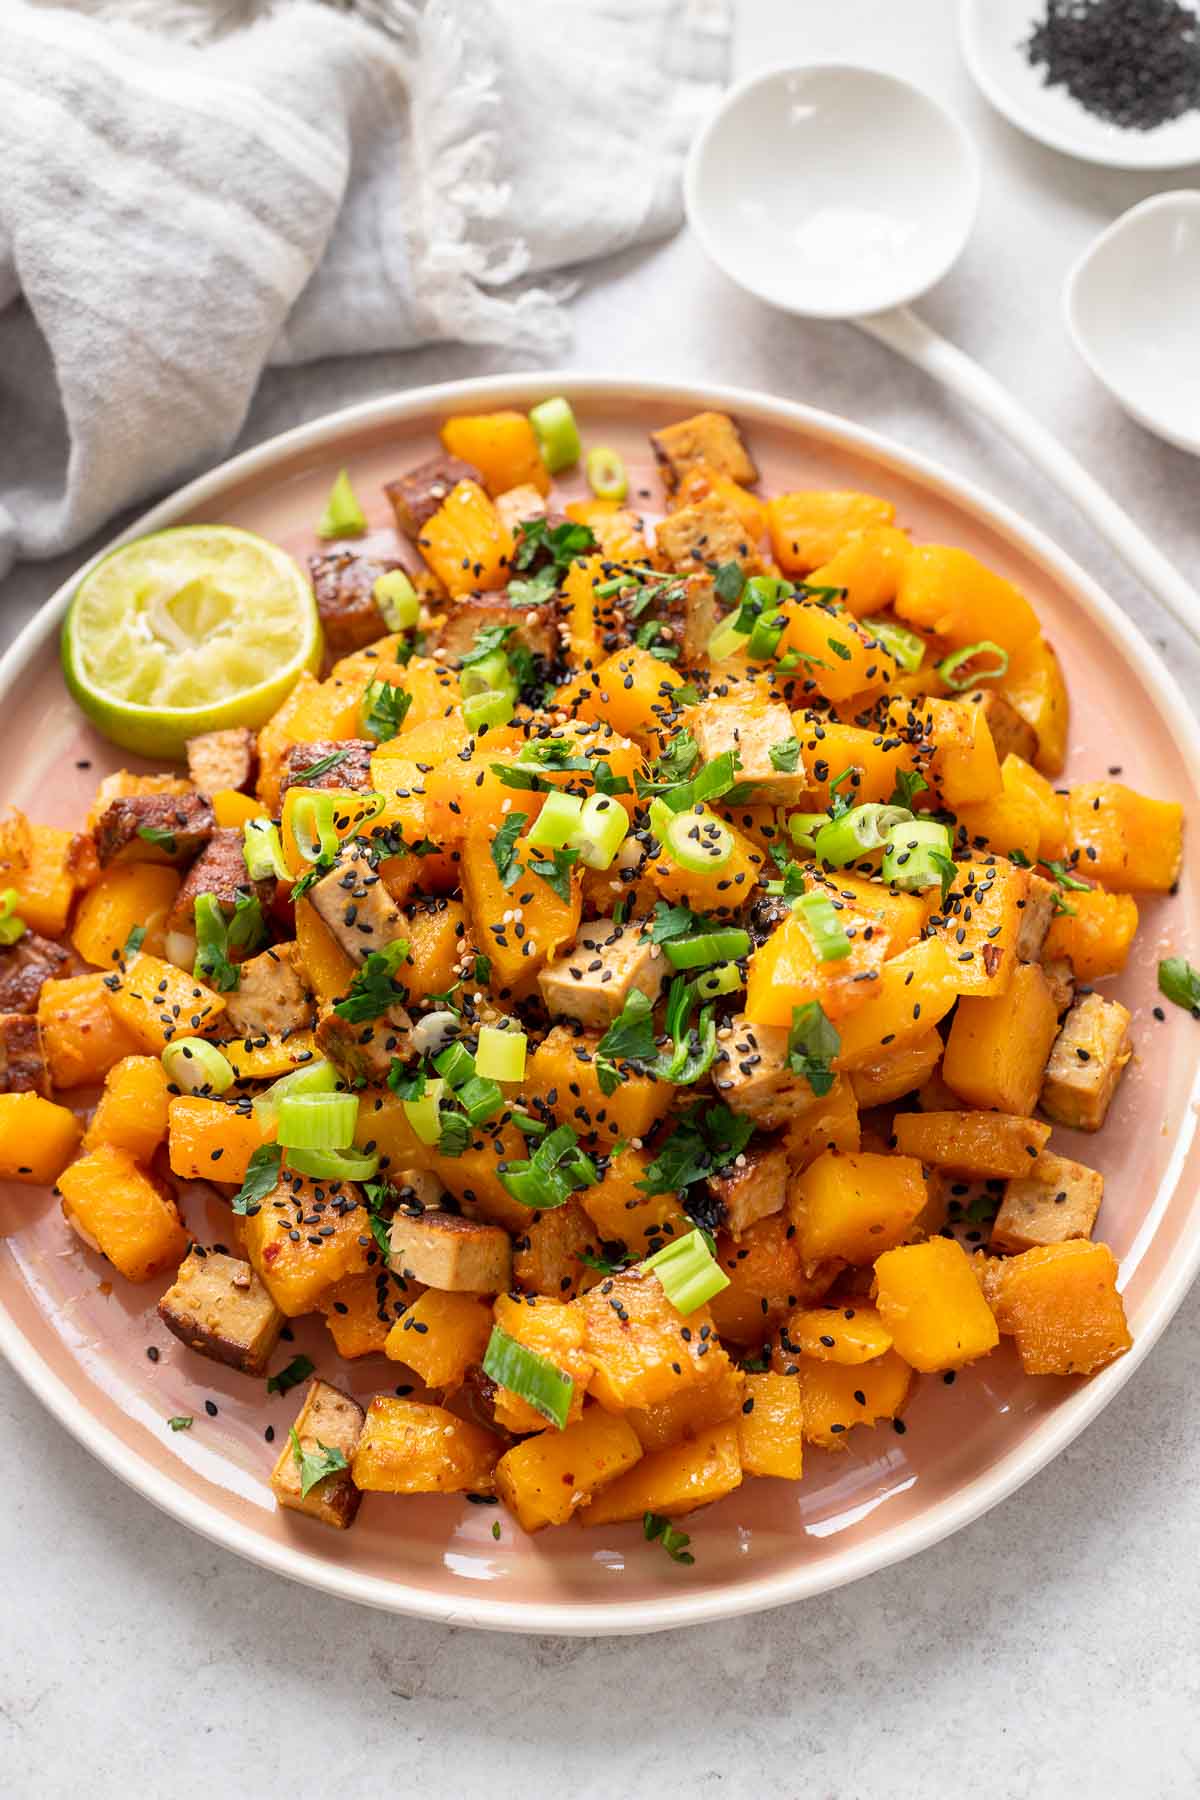 Roasted Butternut Squash with Ginger, Miso & Tofu